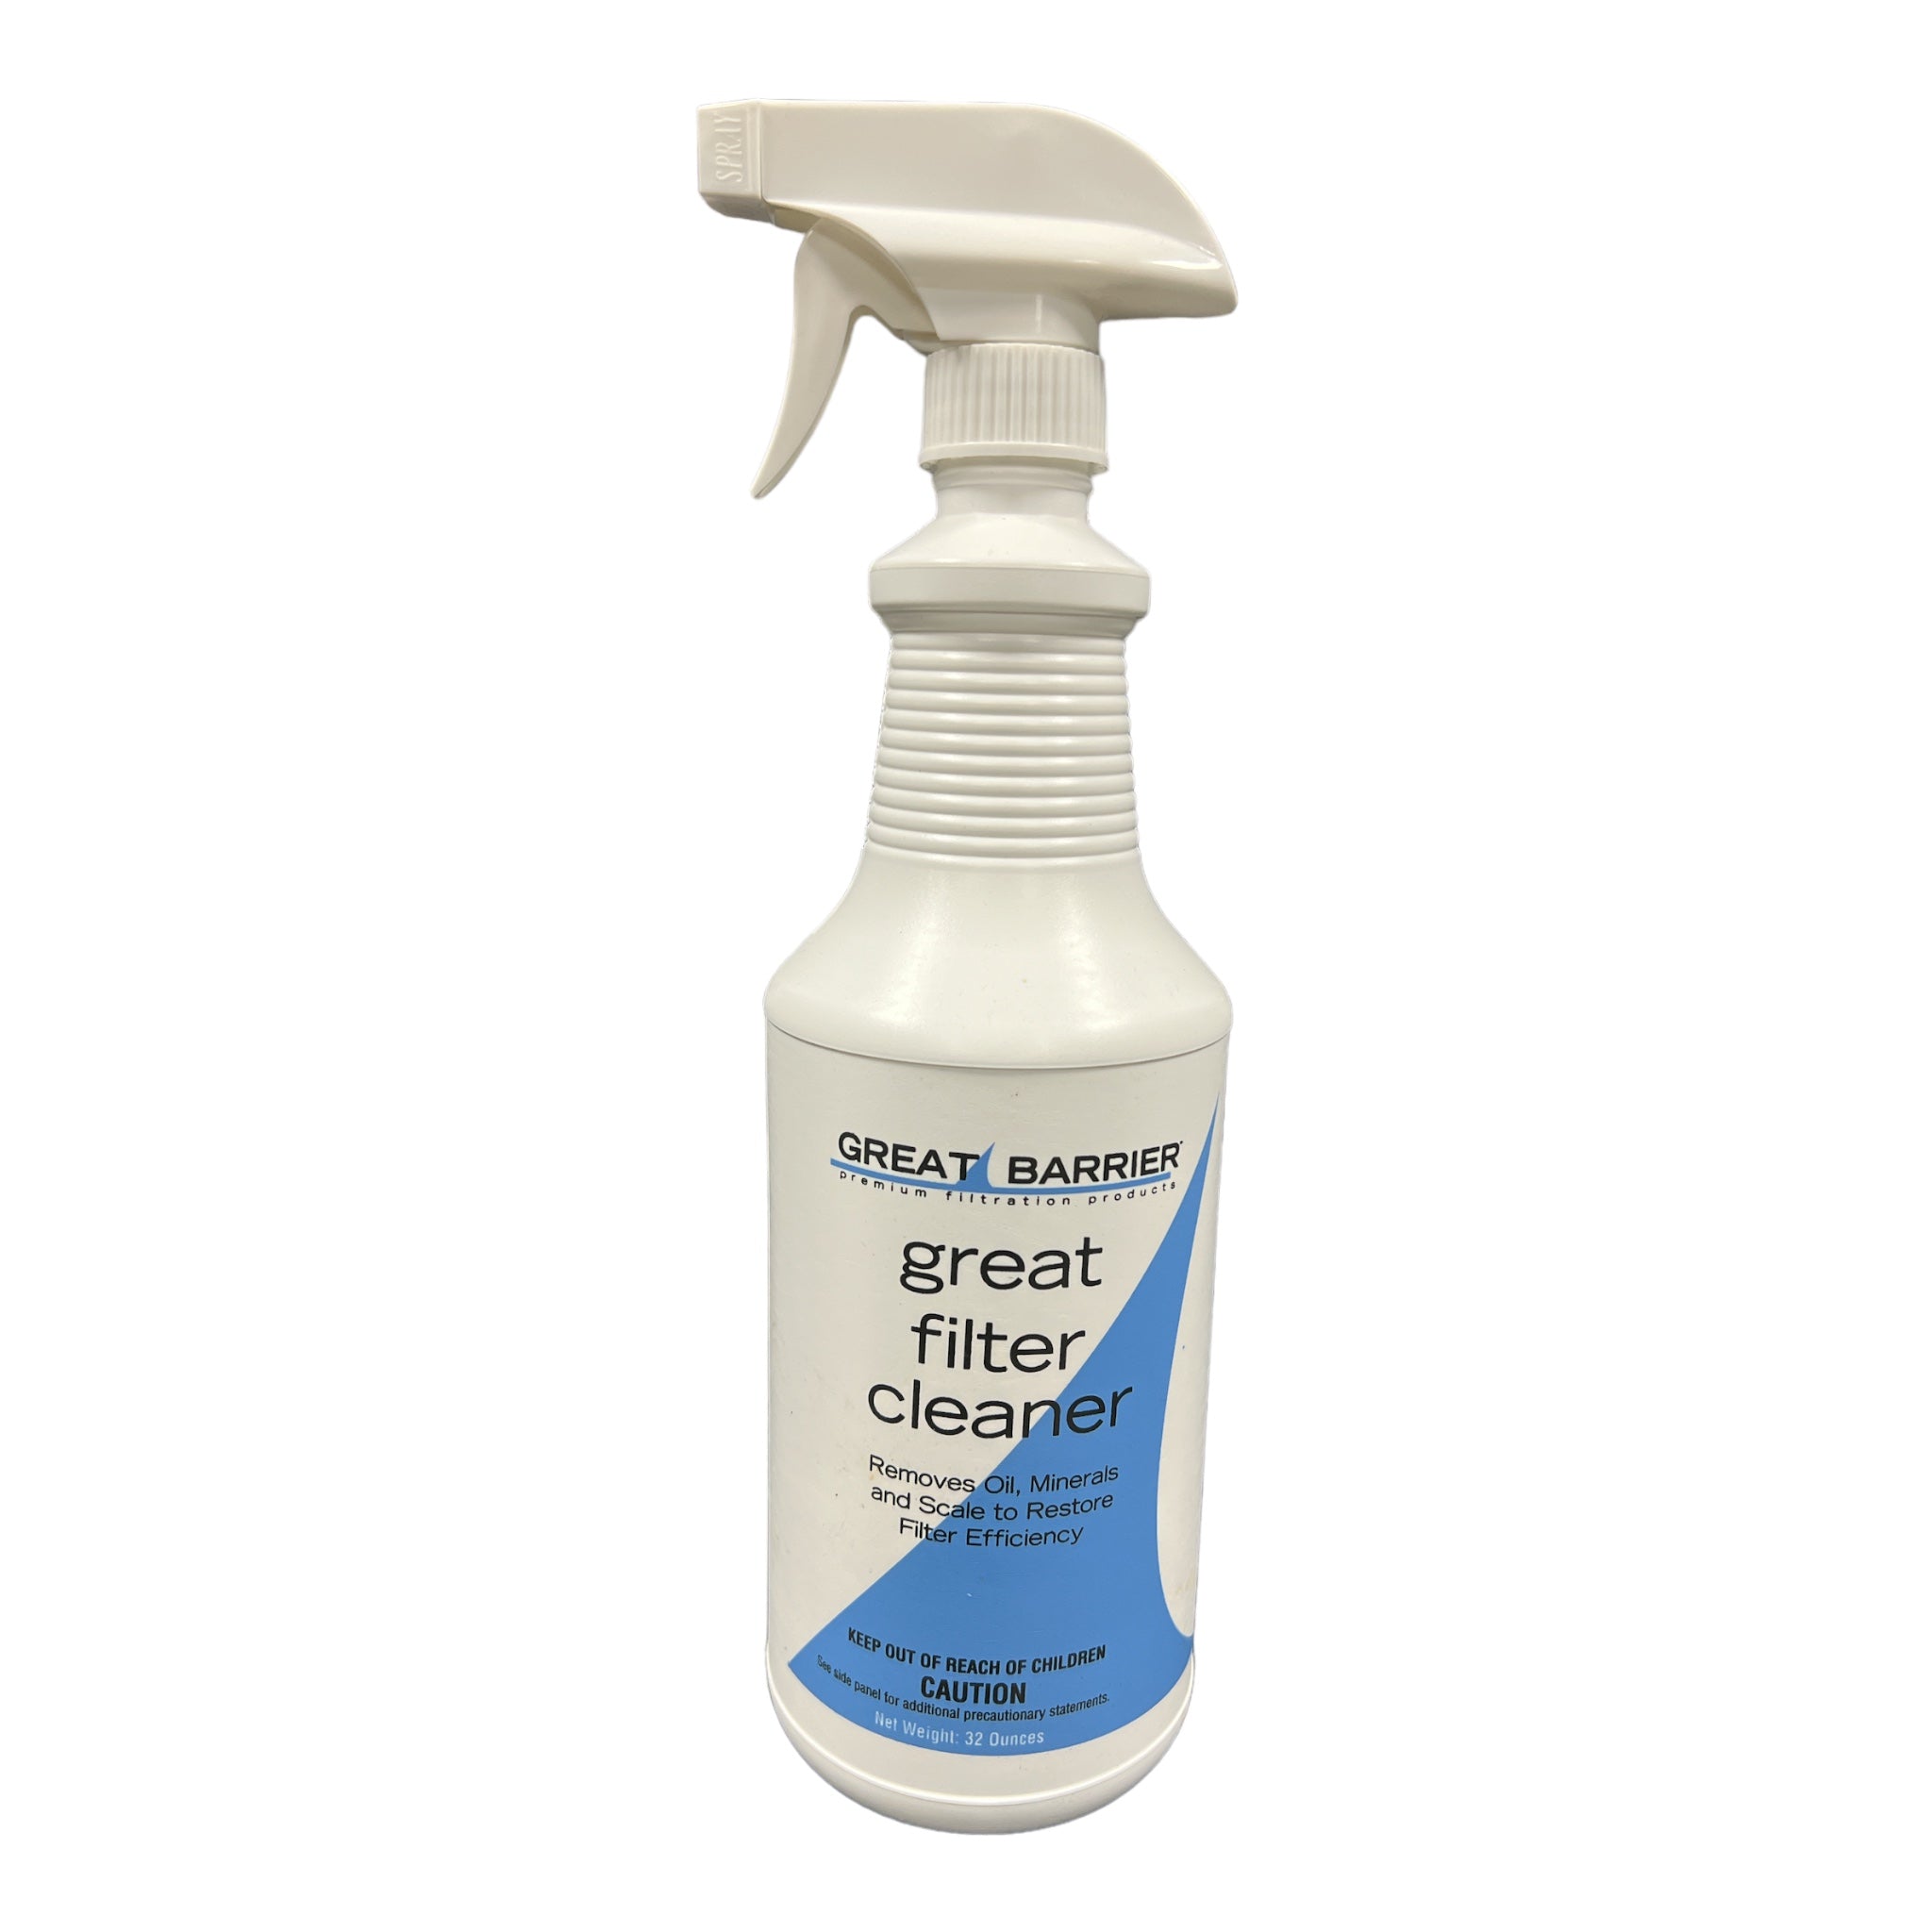 Great Barrier - Great Filter Cleaner Spray